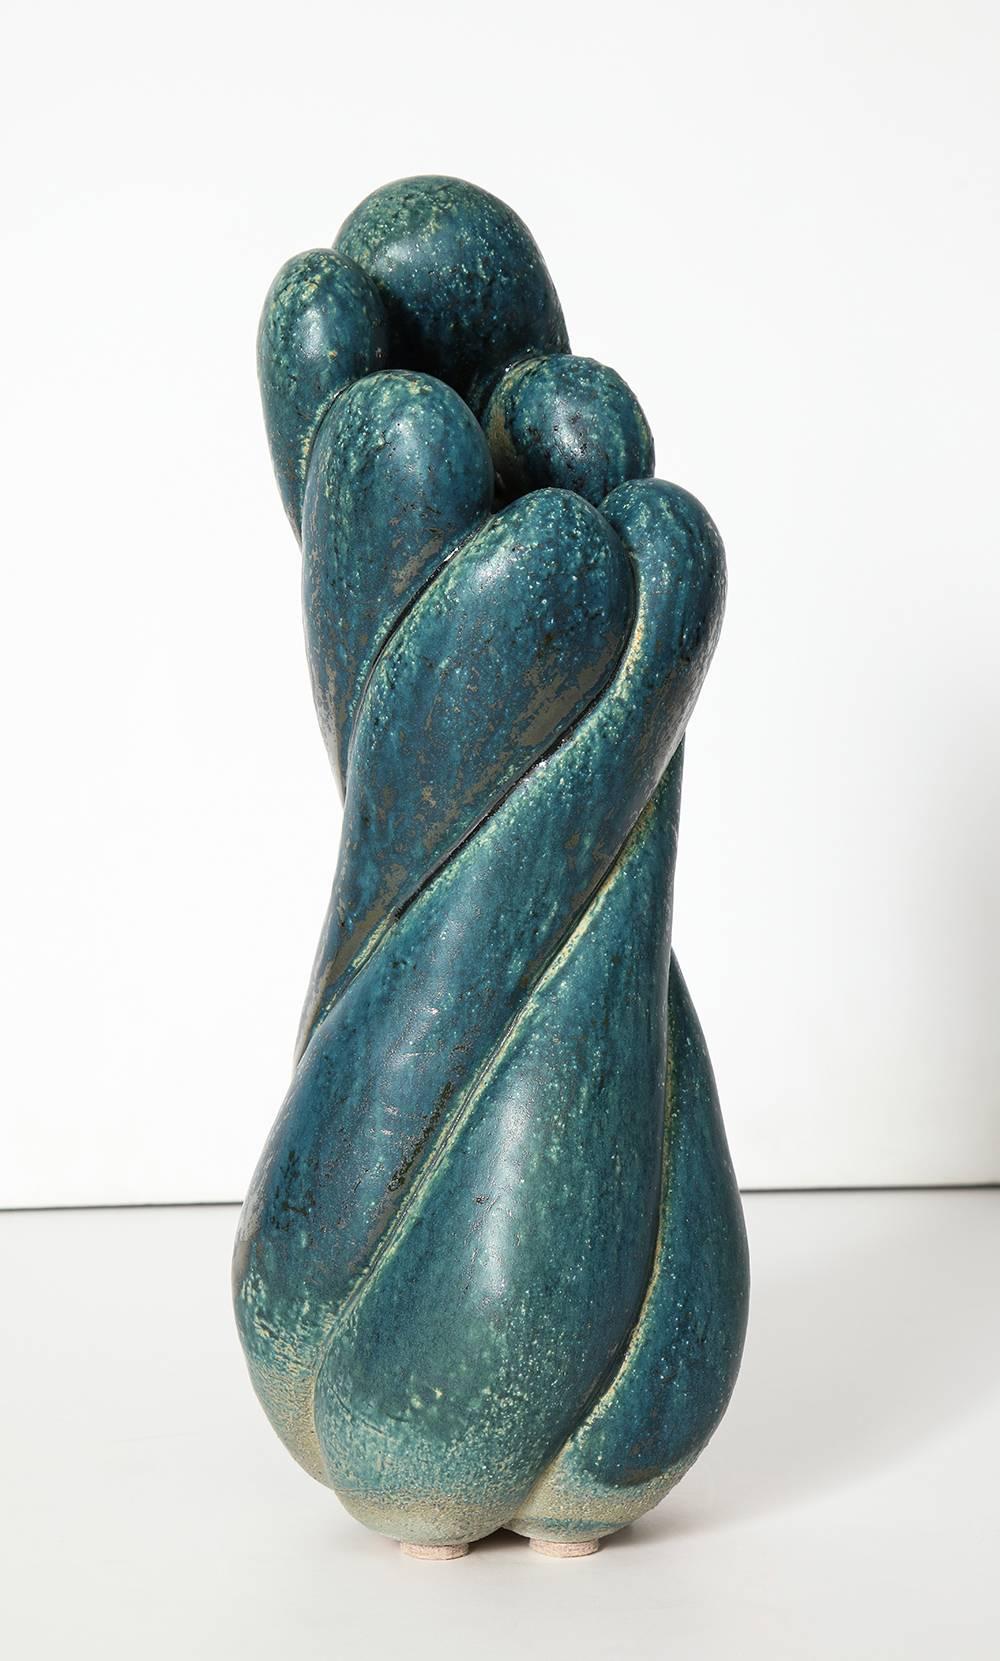 Handmade stoneware vase form, with teal blue glaze. Artist-signed and dated on underside.
  